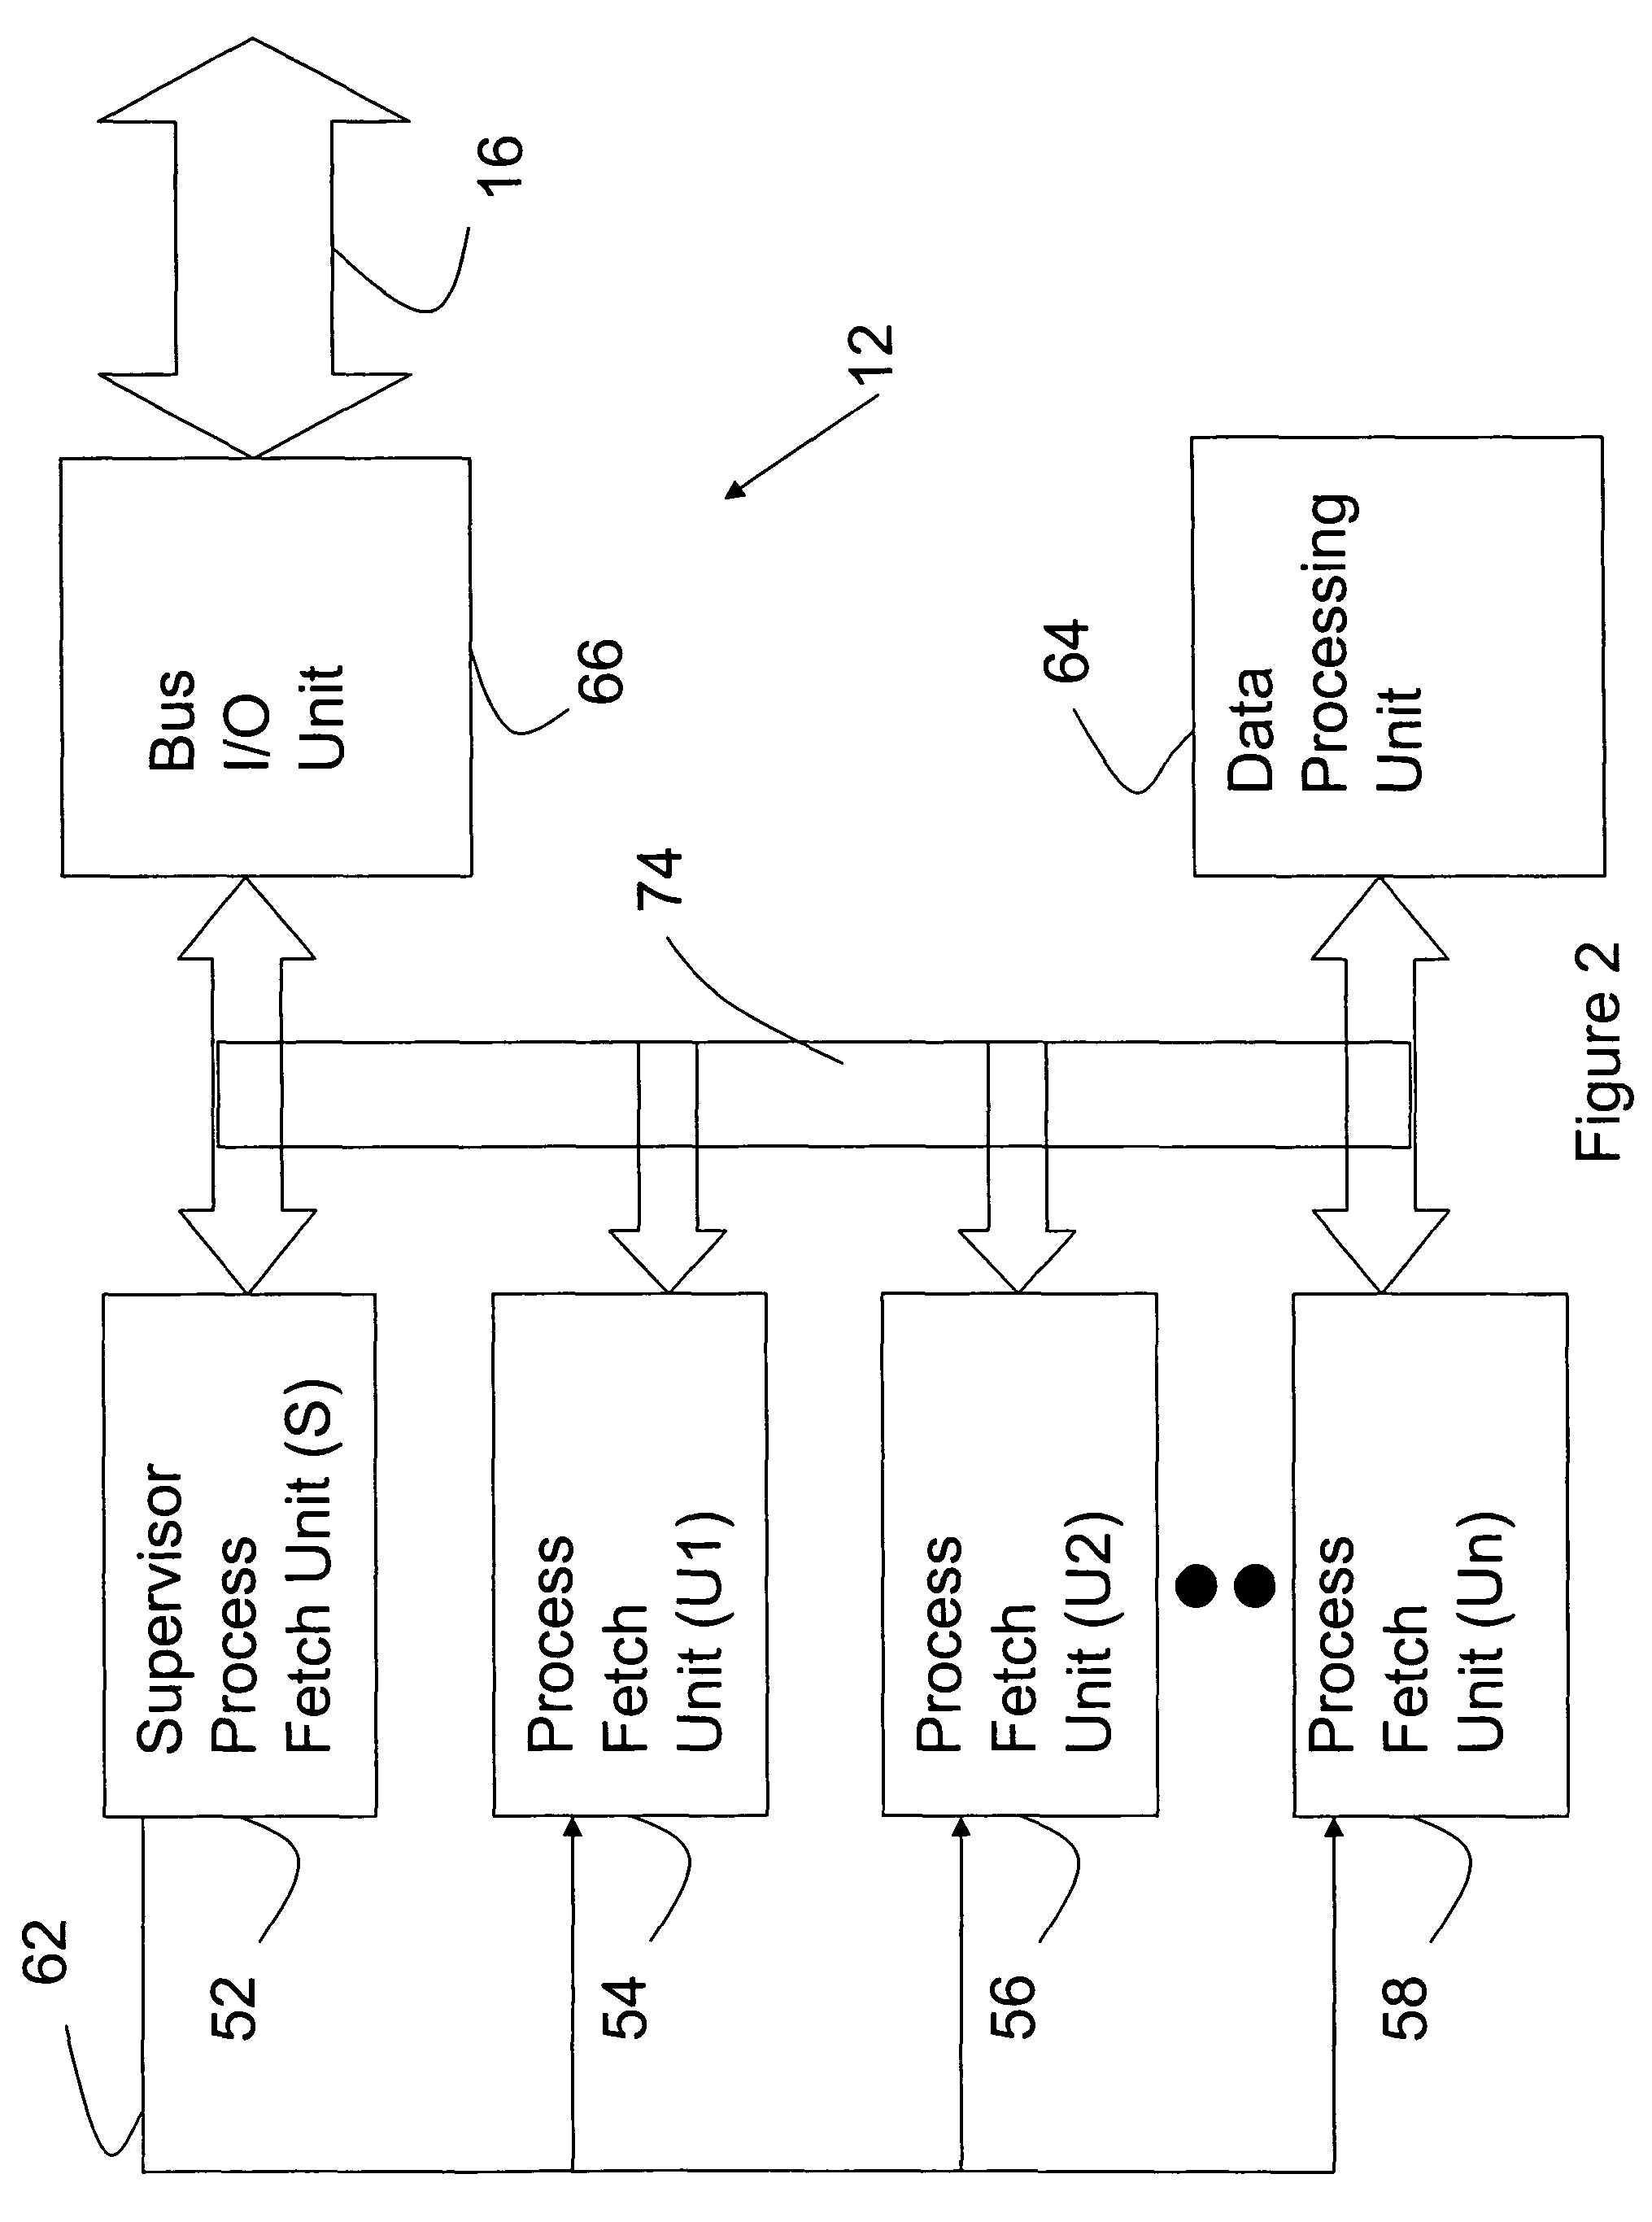 High security, multi-level processor and method of operating a computing system